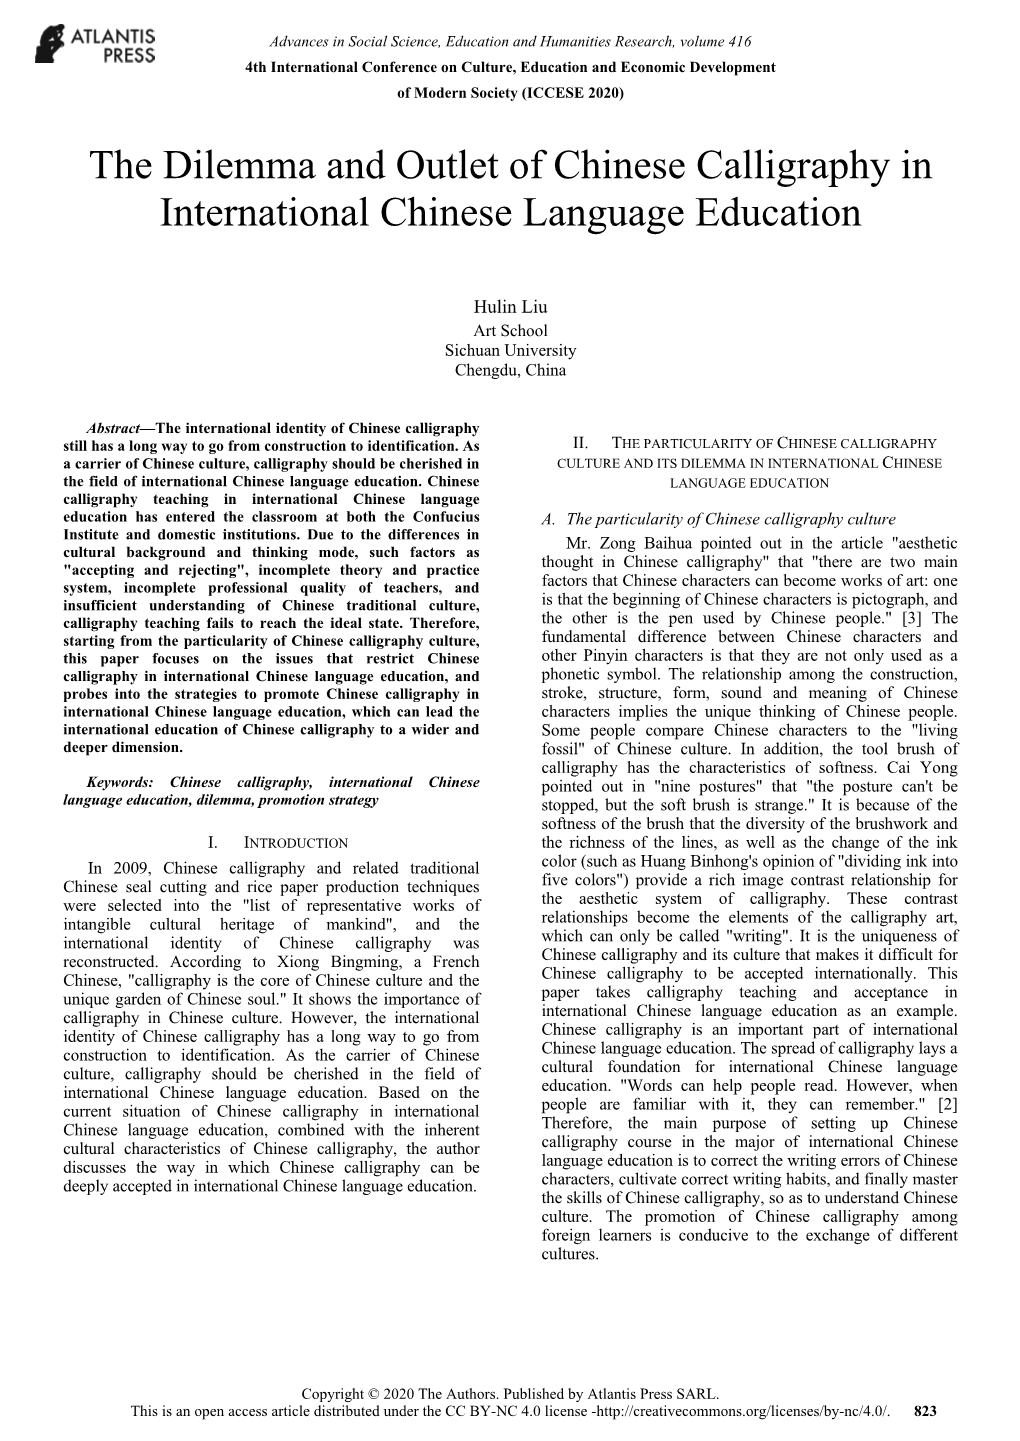 The Dilemma and Outlet of Chinese Calligraphy in International Chinese Language Education